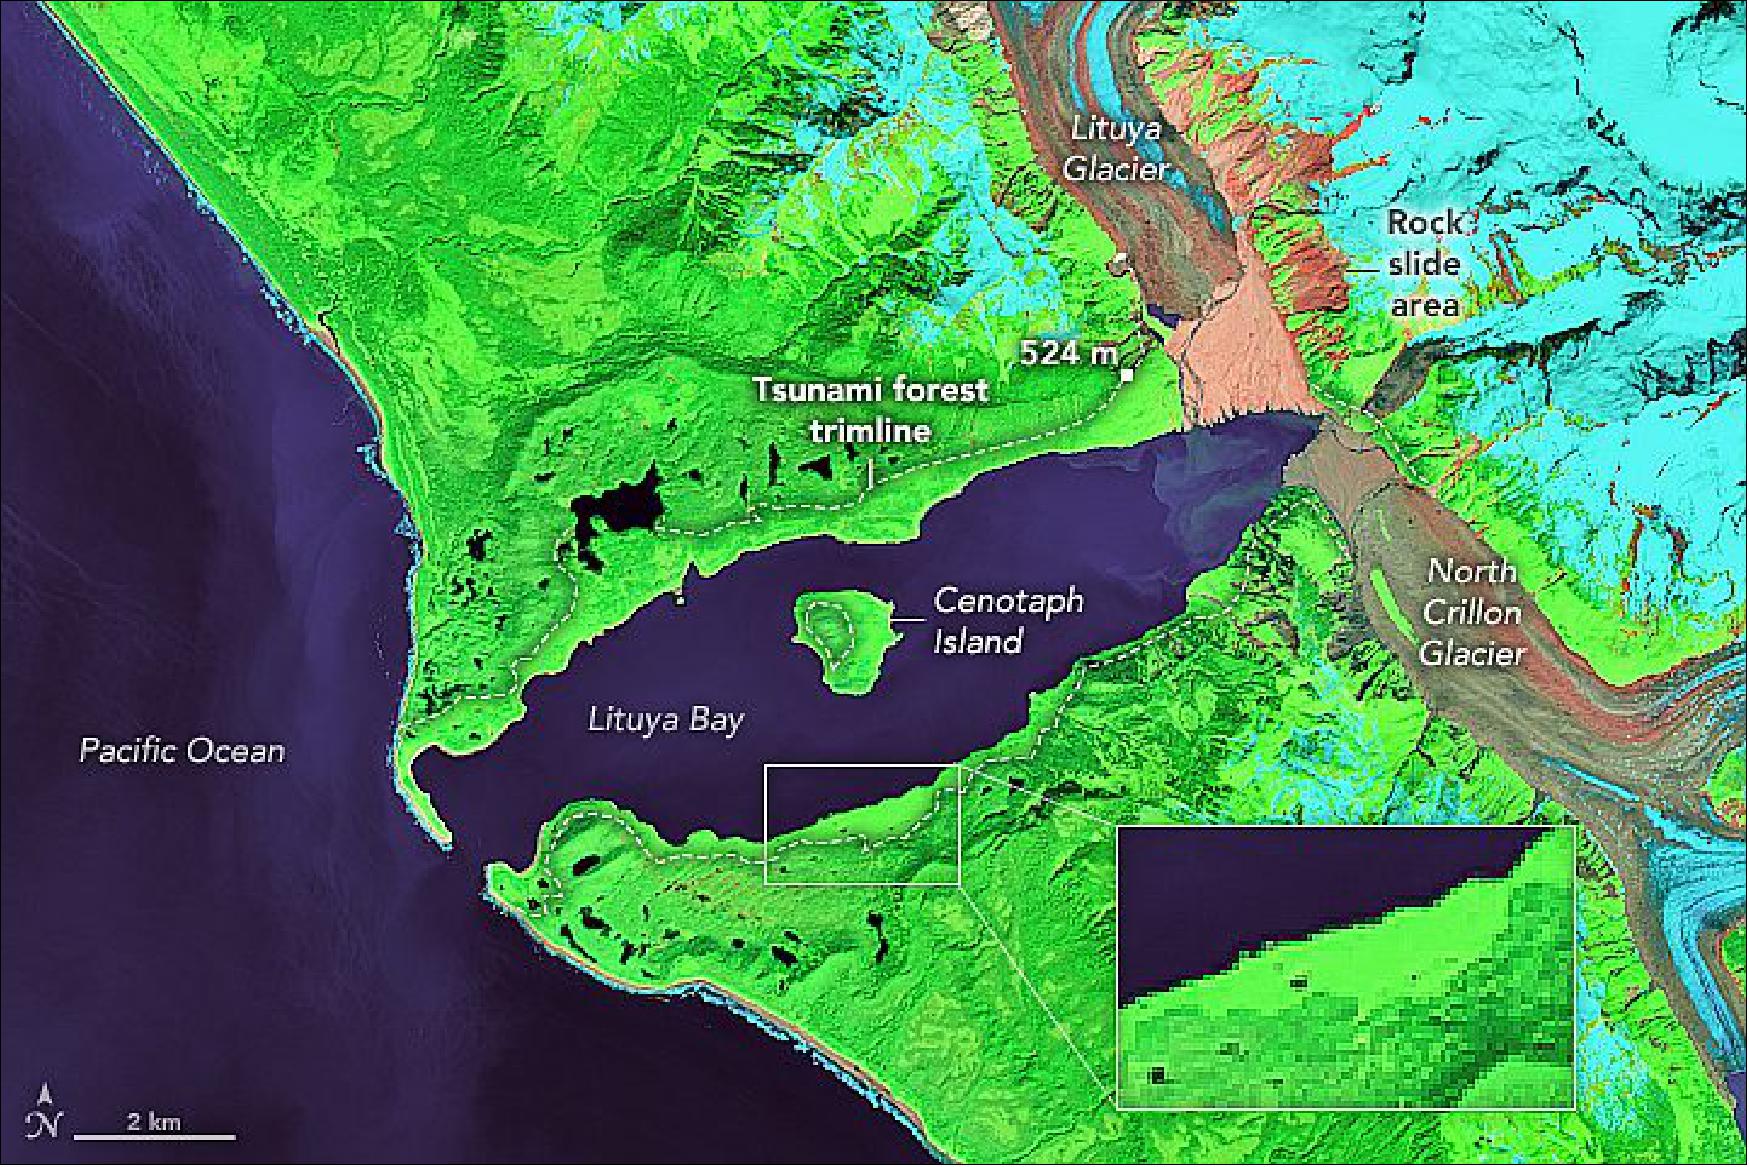 Figure 15: Evidence of the cataclysmic wave is still visible from space more than 60 years later. As seen in the false-color Landsat-8 image (bands 7-5-3) at the top of the page, the damaged trimline is still imprinted in the forest. The lighter green areas along the shore indicate places where forests are younger than older trees (darker areas) that were not affected by the tsunami. When the tsunami hit, it snapped all of the trees and scoured away almost all vegetation. Some 2 square miles (4 km2) of forest were sheared and swept away by the tsunami waves (image credit: NASA Earth Observatory image by Lauren Dauphin, using Landsat data from the U.S. Geological Survey. Aerial photos of Lituya Bay and the source of the rockslide by Don Miller for the USGS. Story by Adam Voiland)